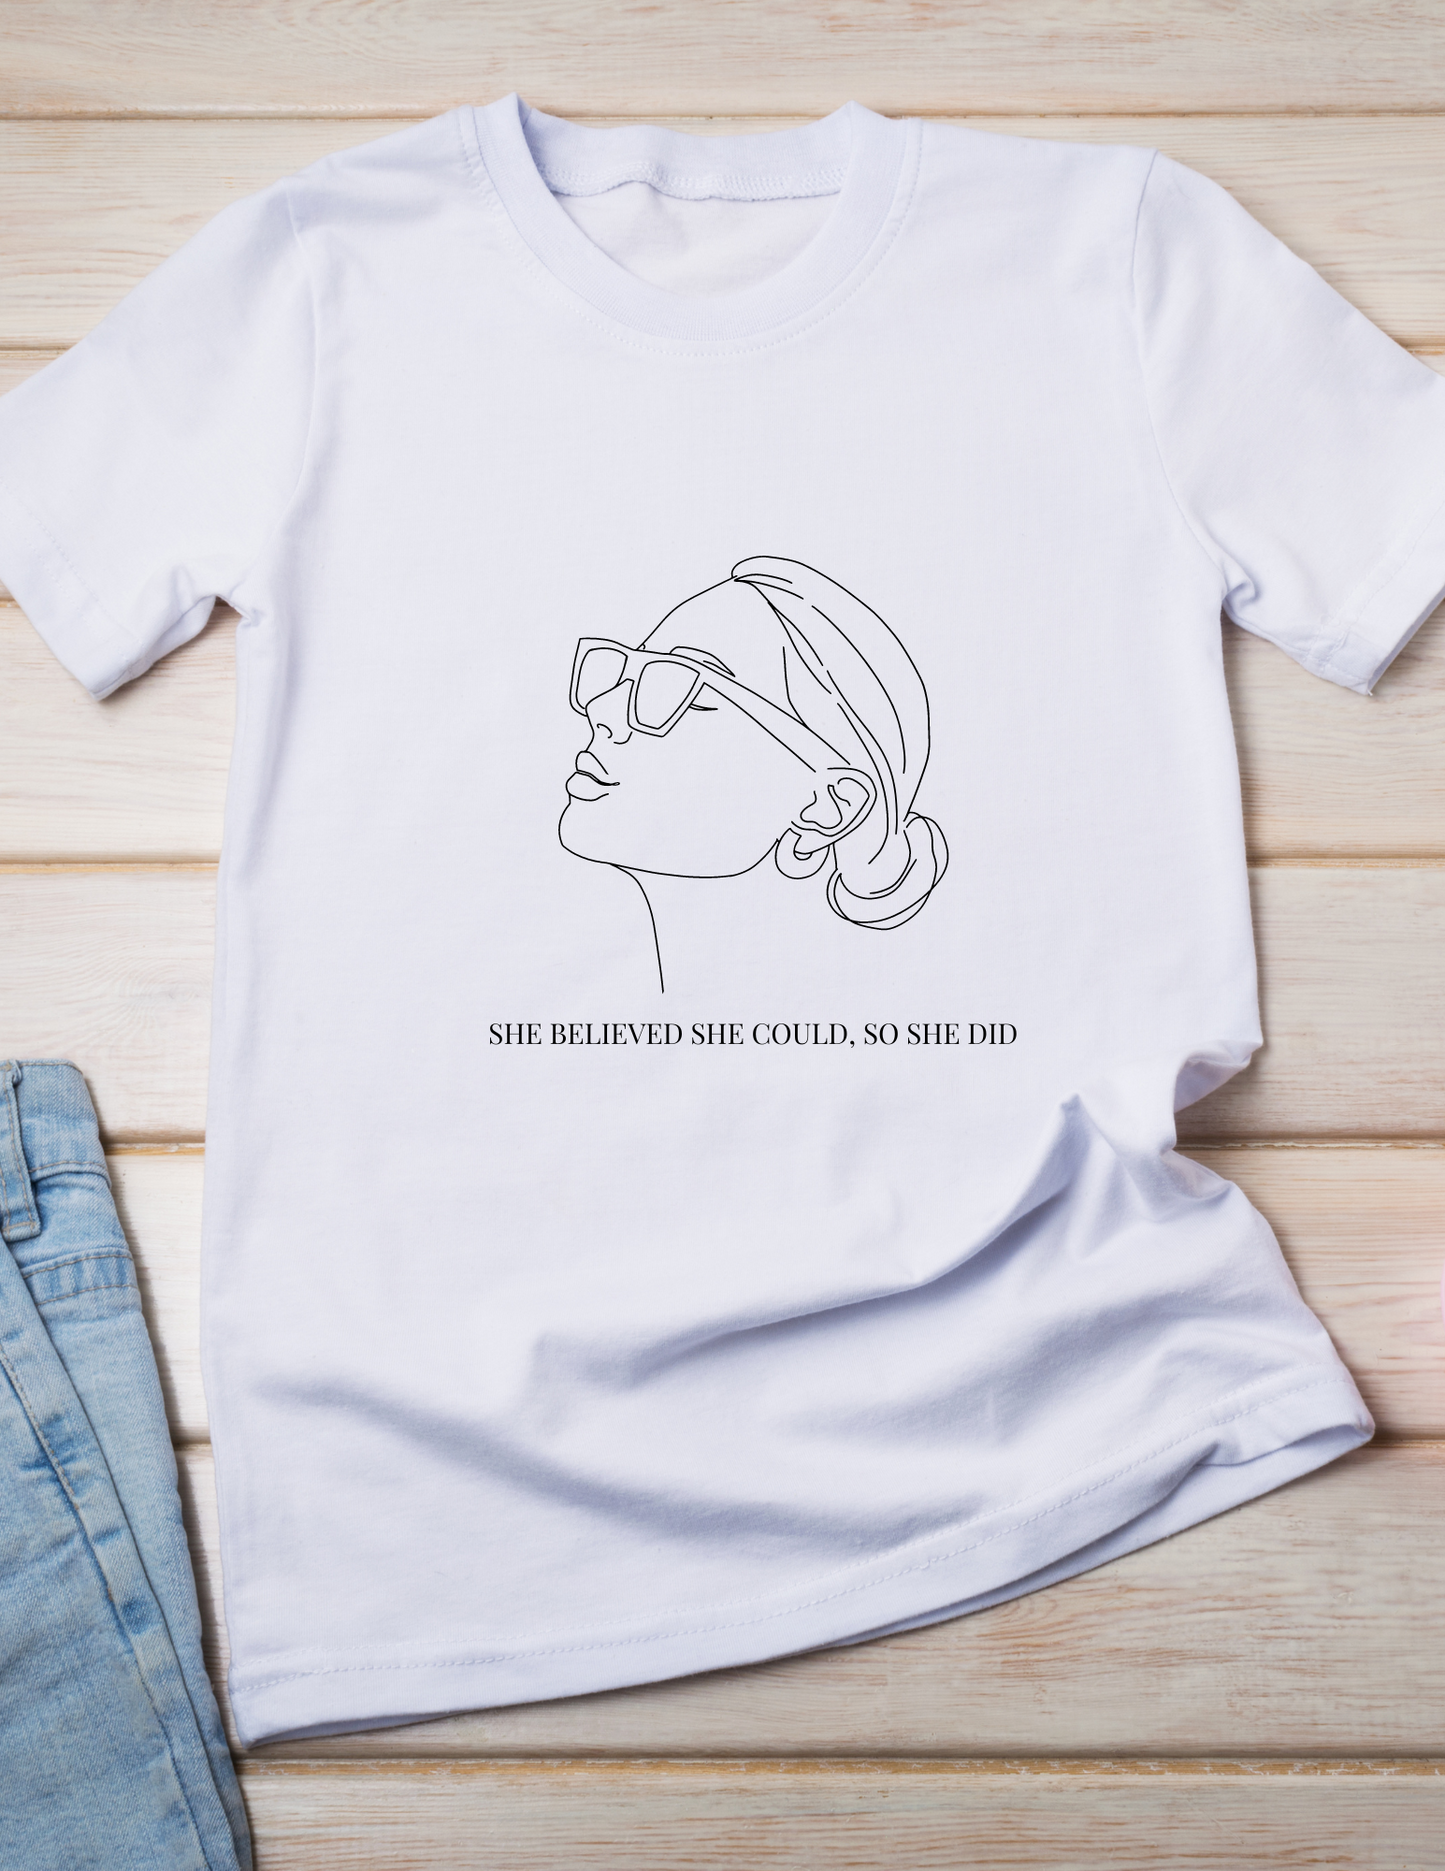 Women's white t-shirt with a black outline of a women wearing sunglasses with her hair in a bun and earrings that has a quote she believed she could, so she did underneath on a wood background with an image of some jeans.